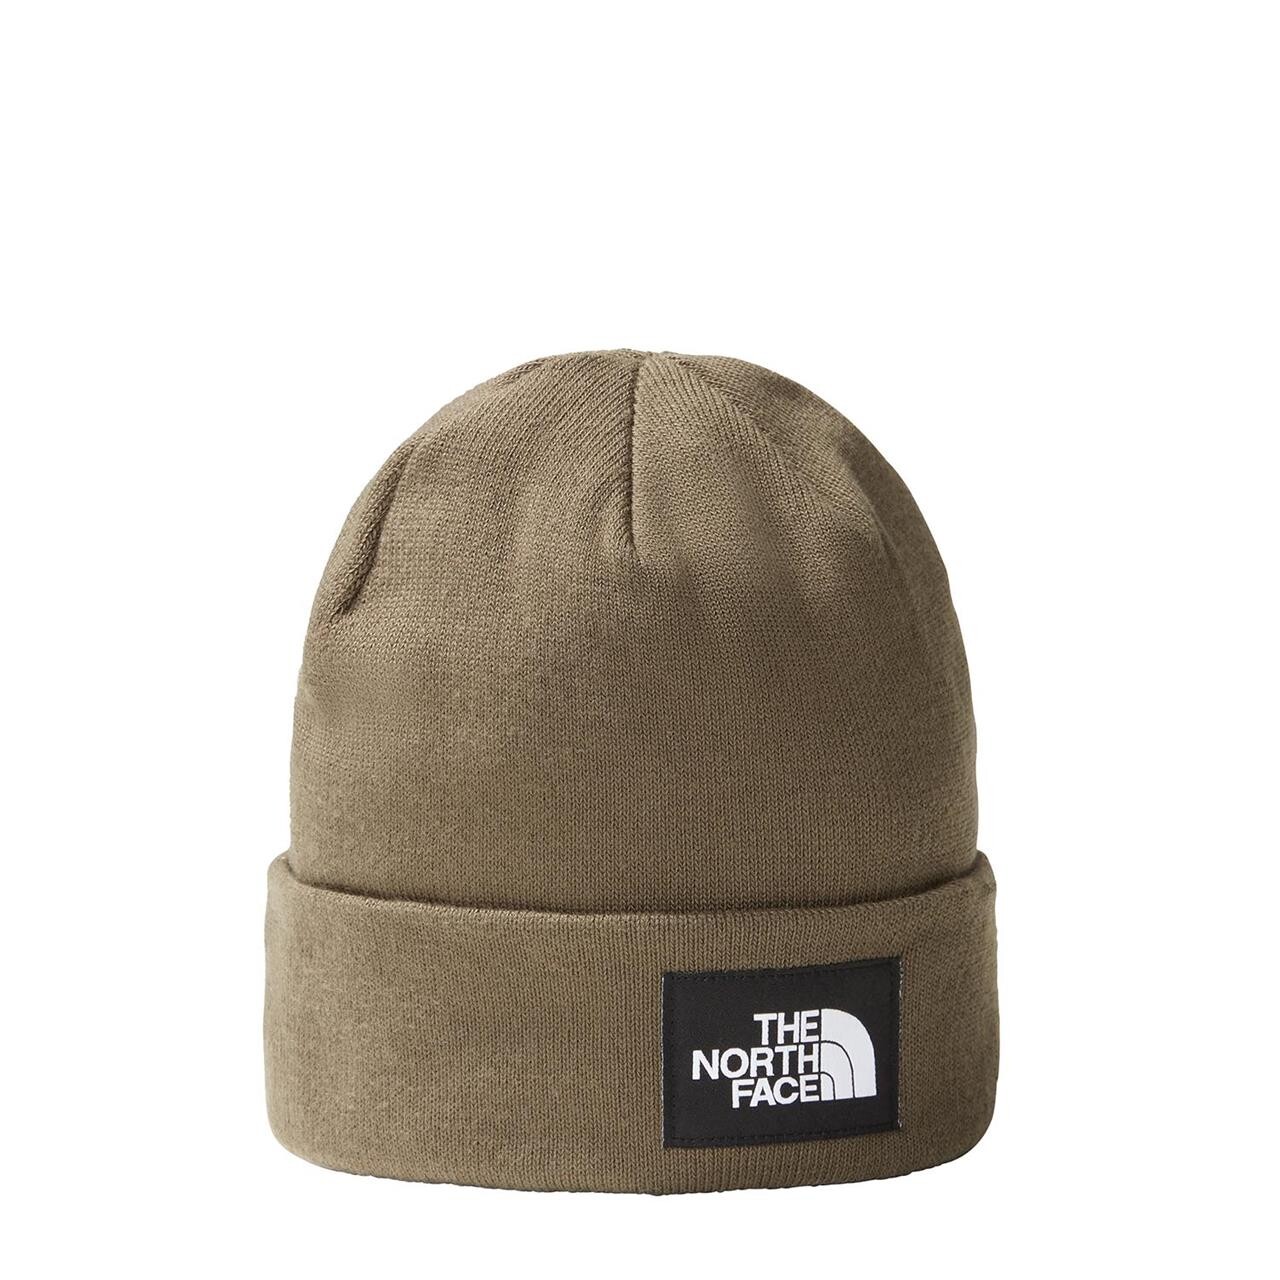 10: The North Face Dock Worker Recycled Beanie (Grøn (NEW TAUPE GREEN) One size)